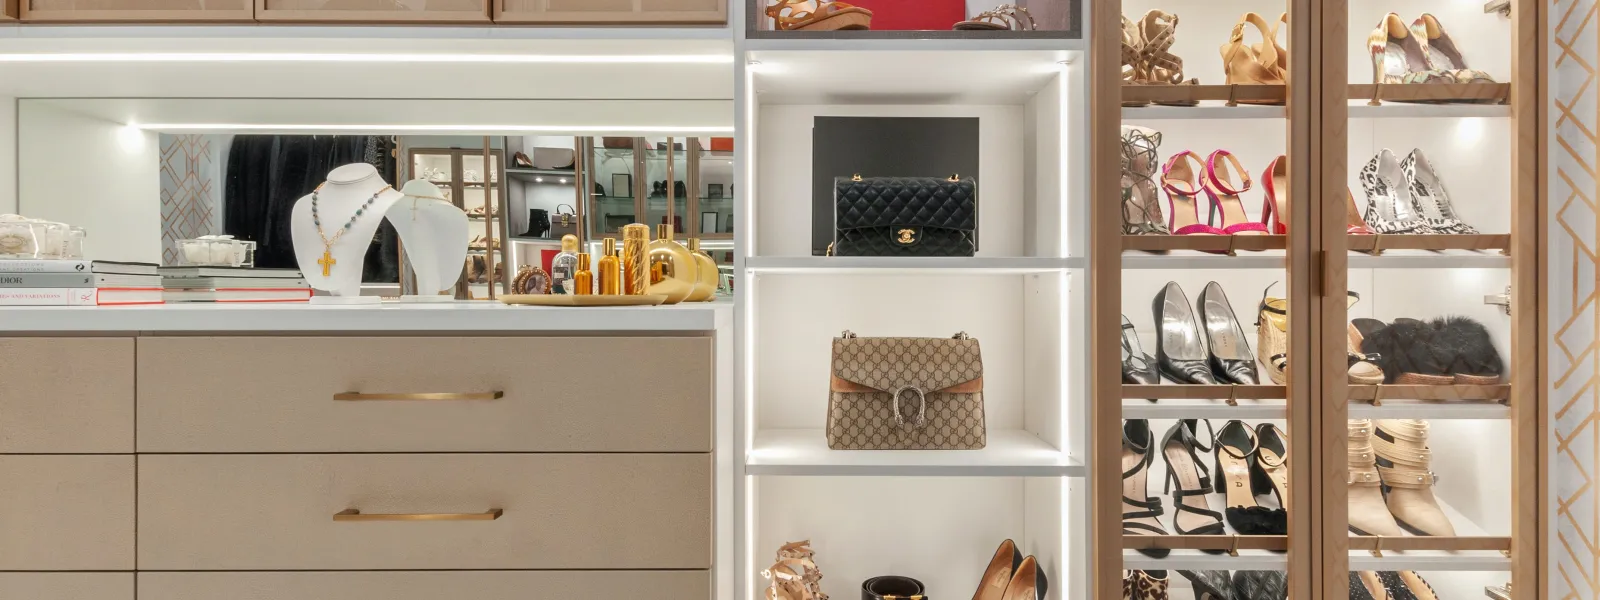 a luxury closet with designer shoes handbags and jewelry